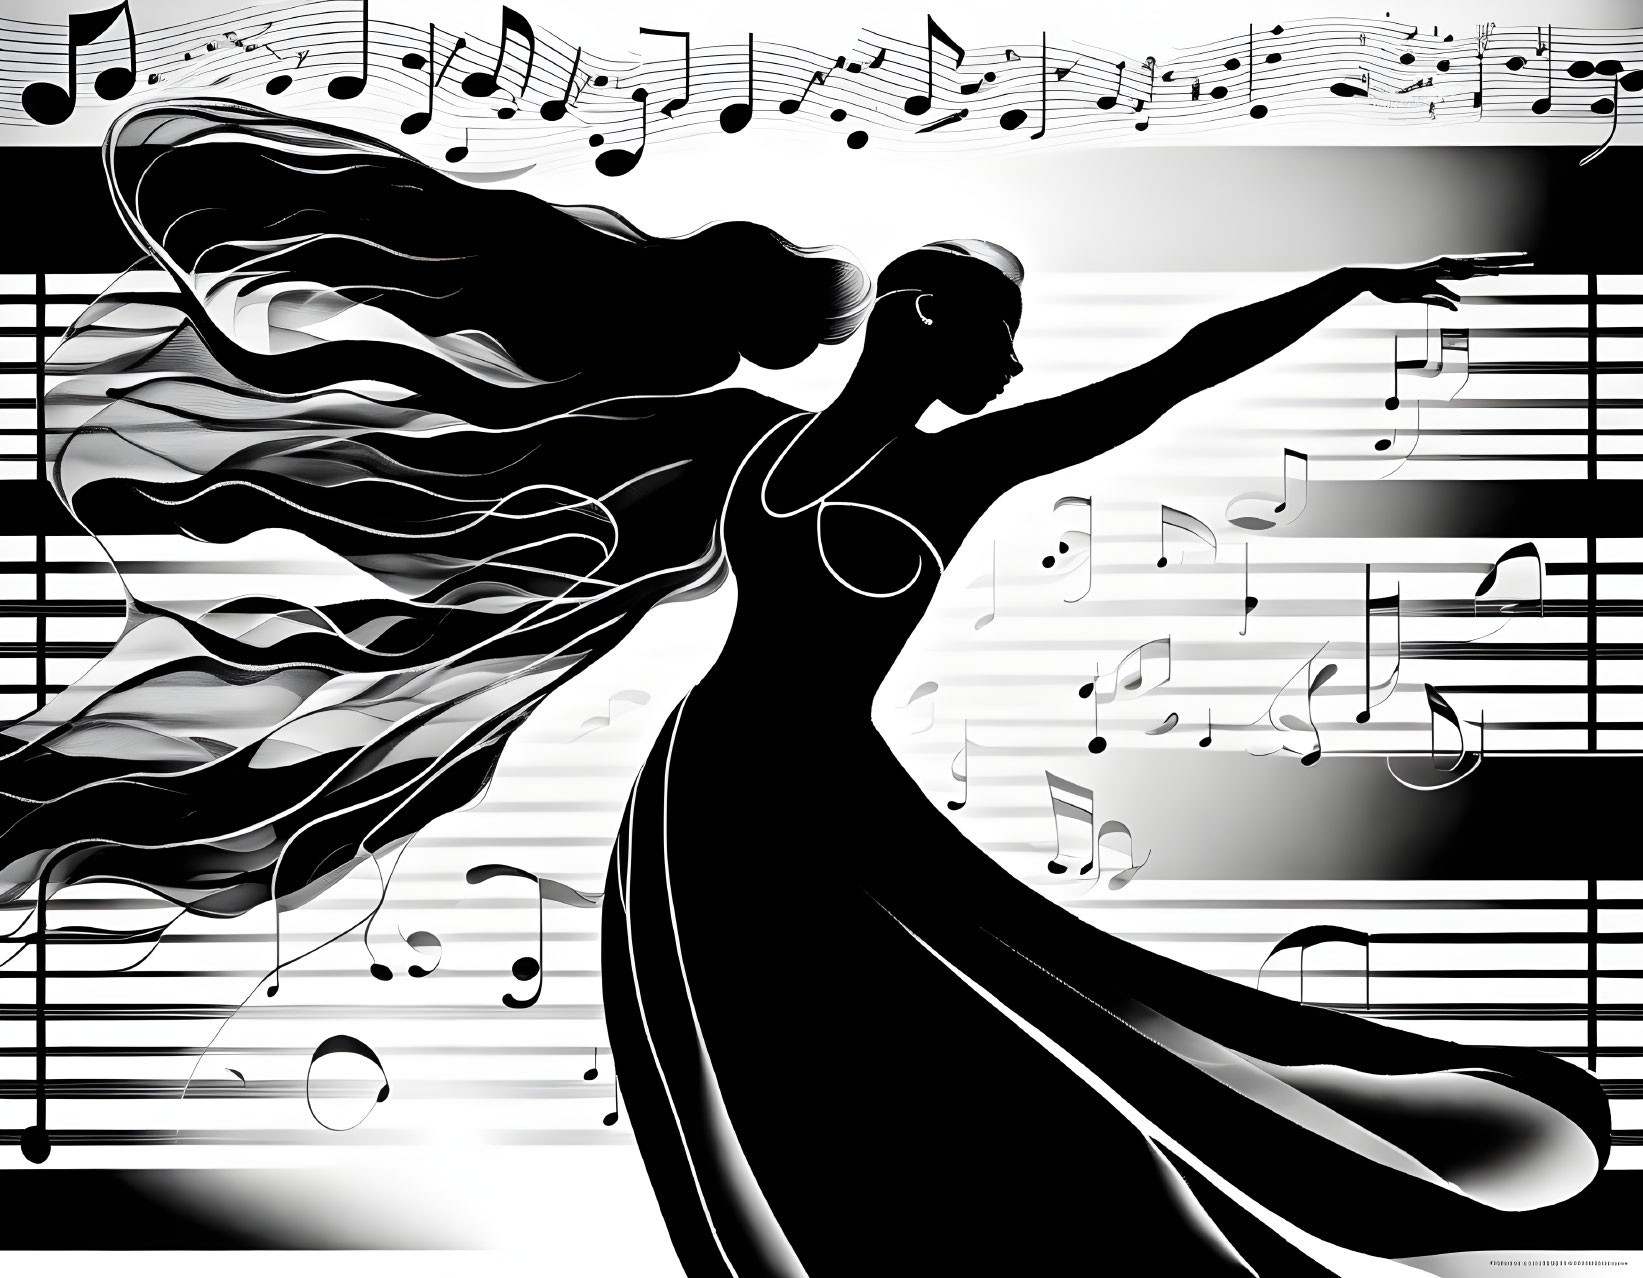 Monochrome illustration of woman with flowing hair and musical notes in dynamic composition